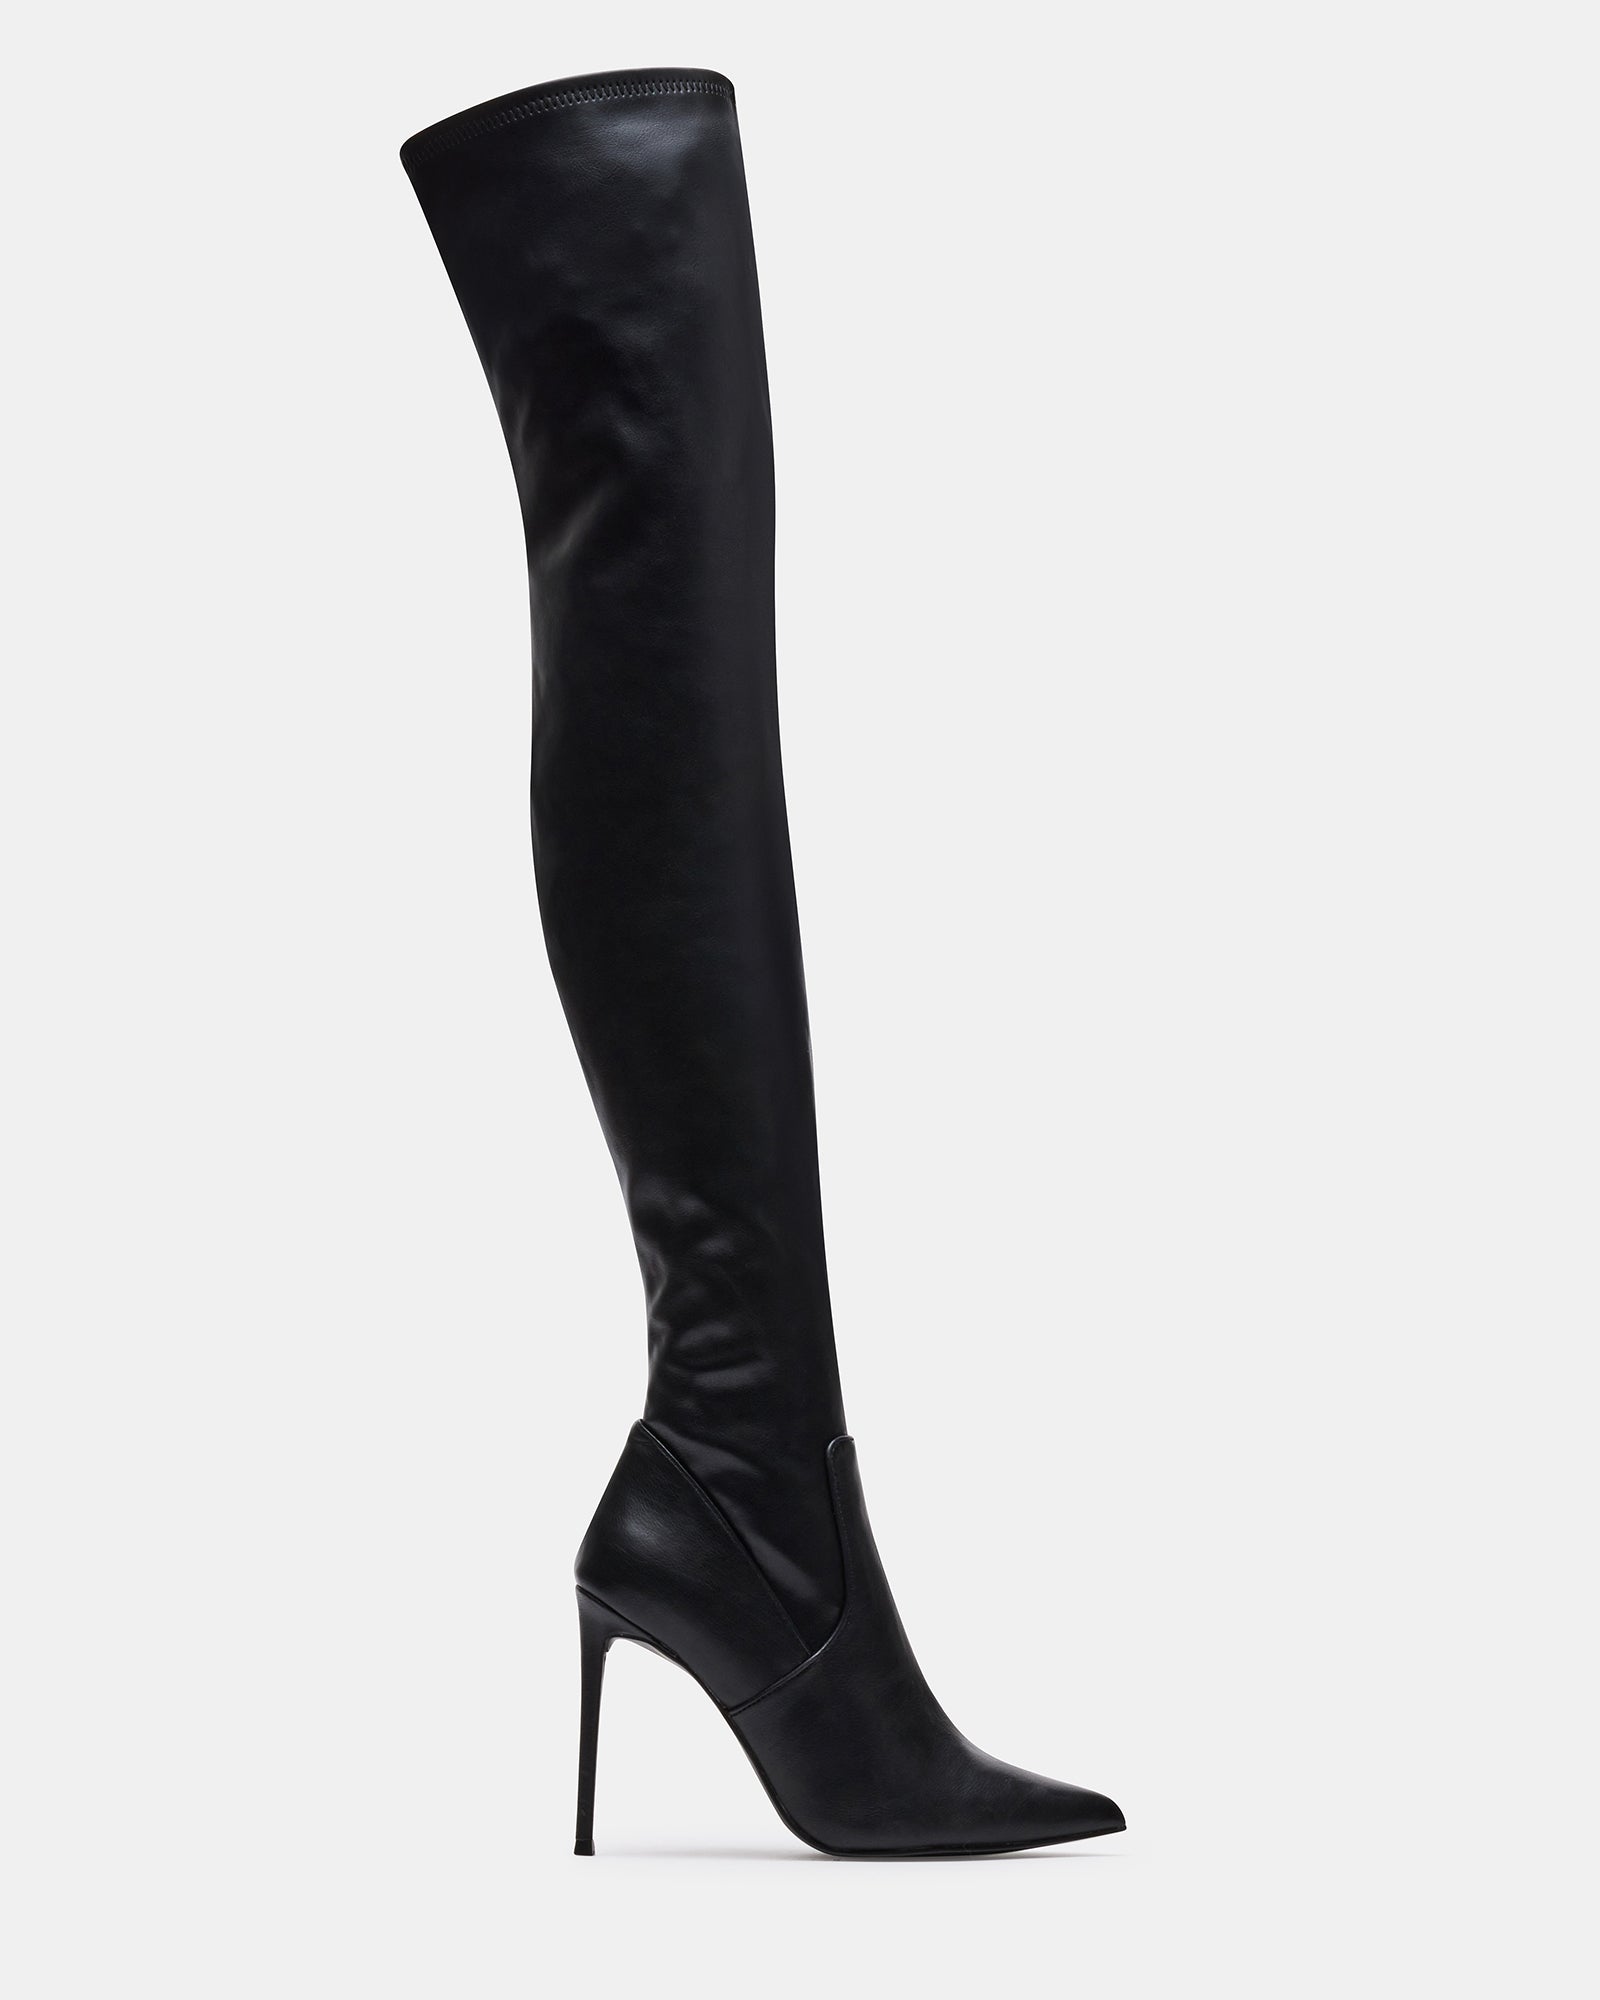  Womens Thigh High Boots Sexy Black PU Leather Surgical Stretch  Over The Knee High Boots Round Toe Low Chunky Heel Stiletto : Clothing,  Shoes & Jewelry